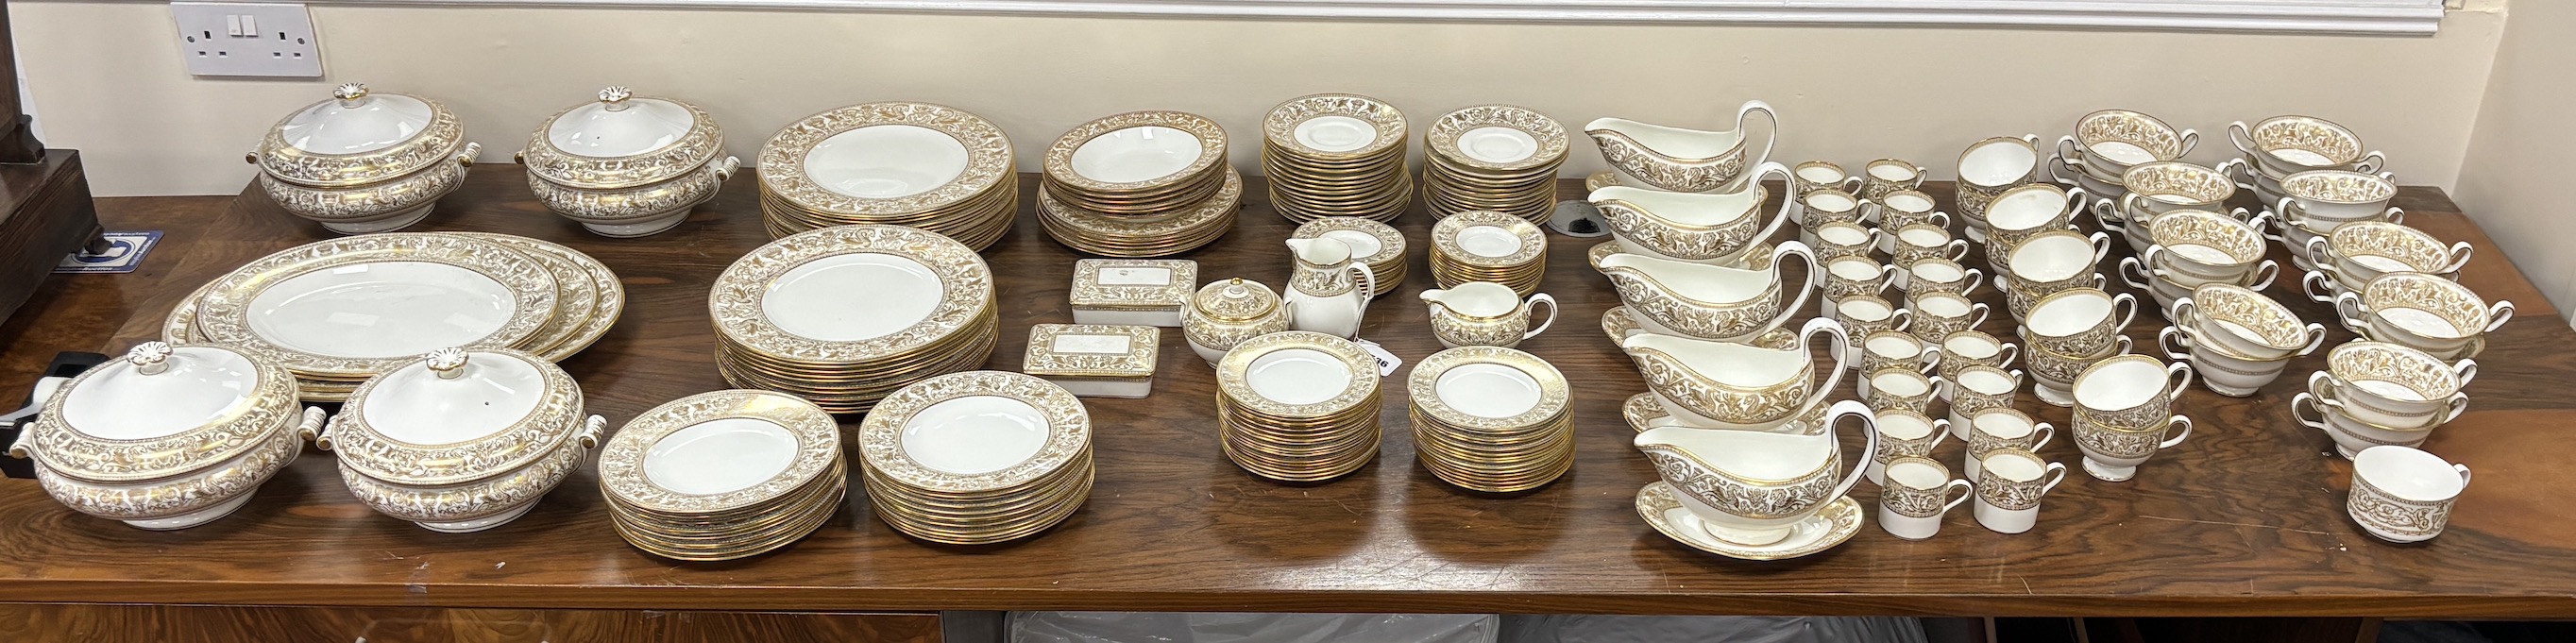 An extensive Wedgwood Gold Florentine dinner service, including 26 dinner plates, 50 side plates, 18 soup bowls with 16 saucers, 6 tea cups and 4 saucers, 6 bowls, 6 large cheese plates, 5 gravy boats and 3 saucers, 3 ve